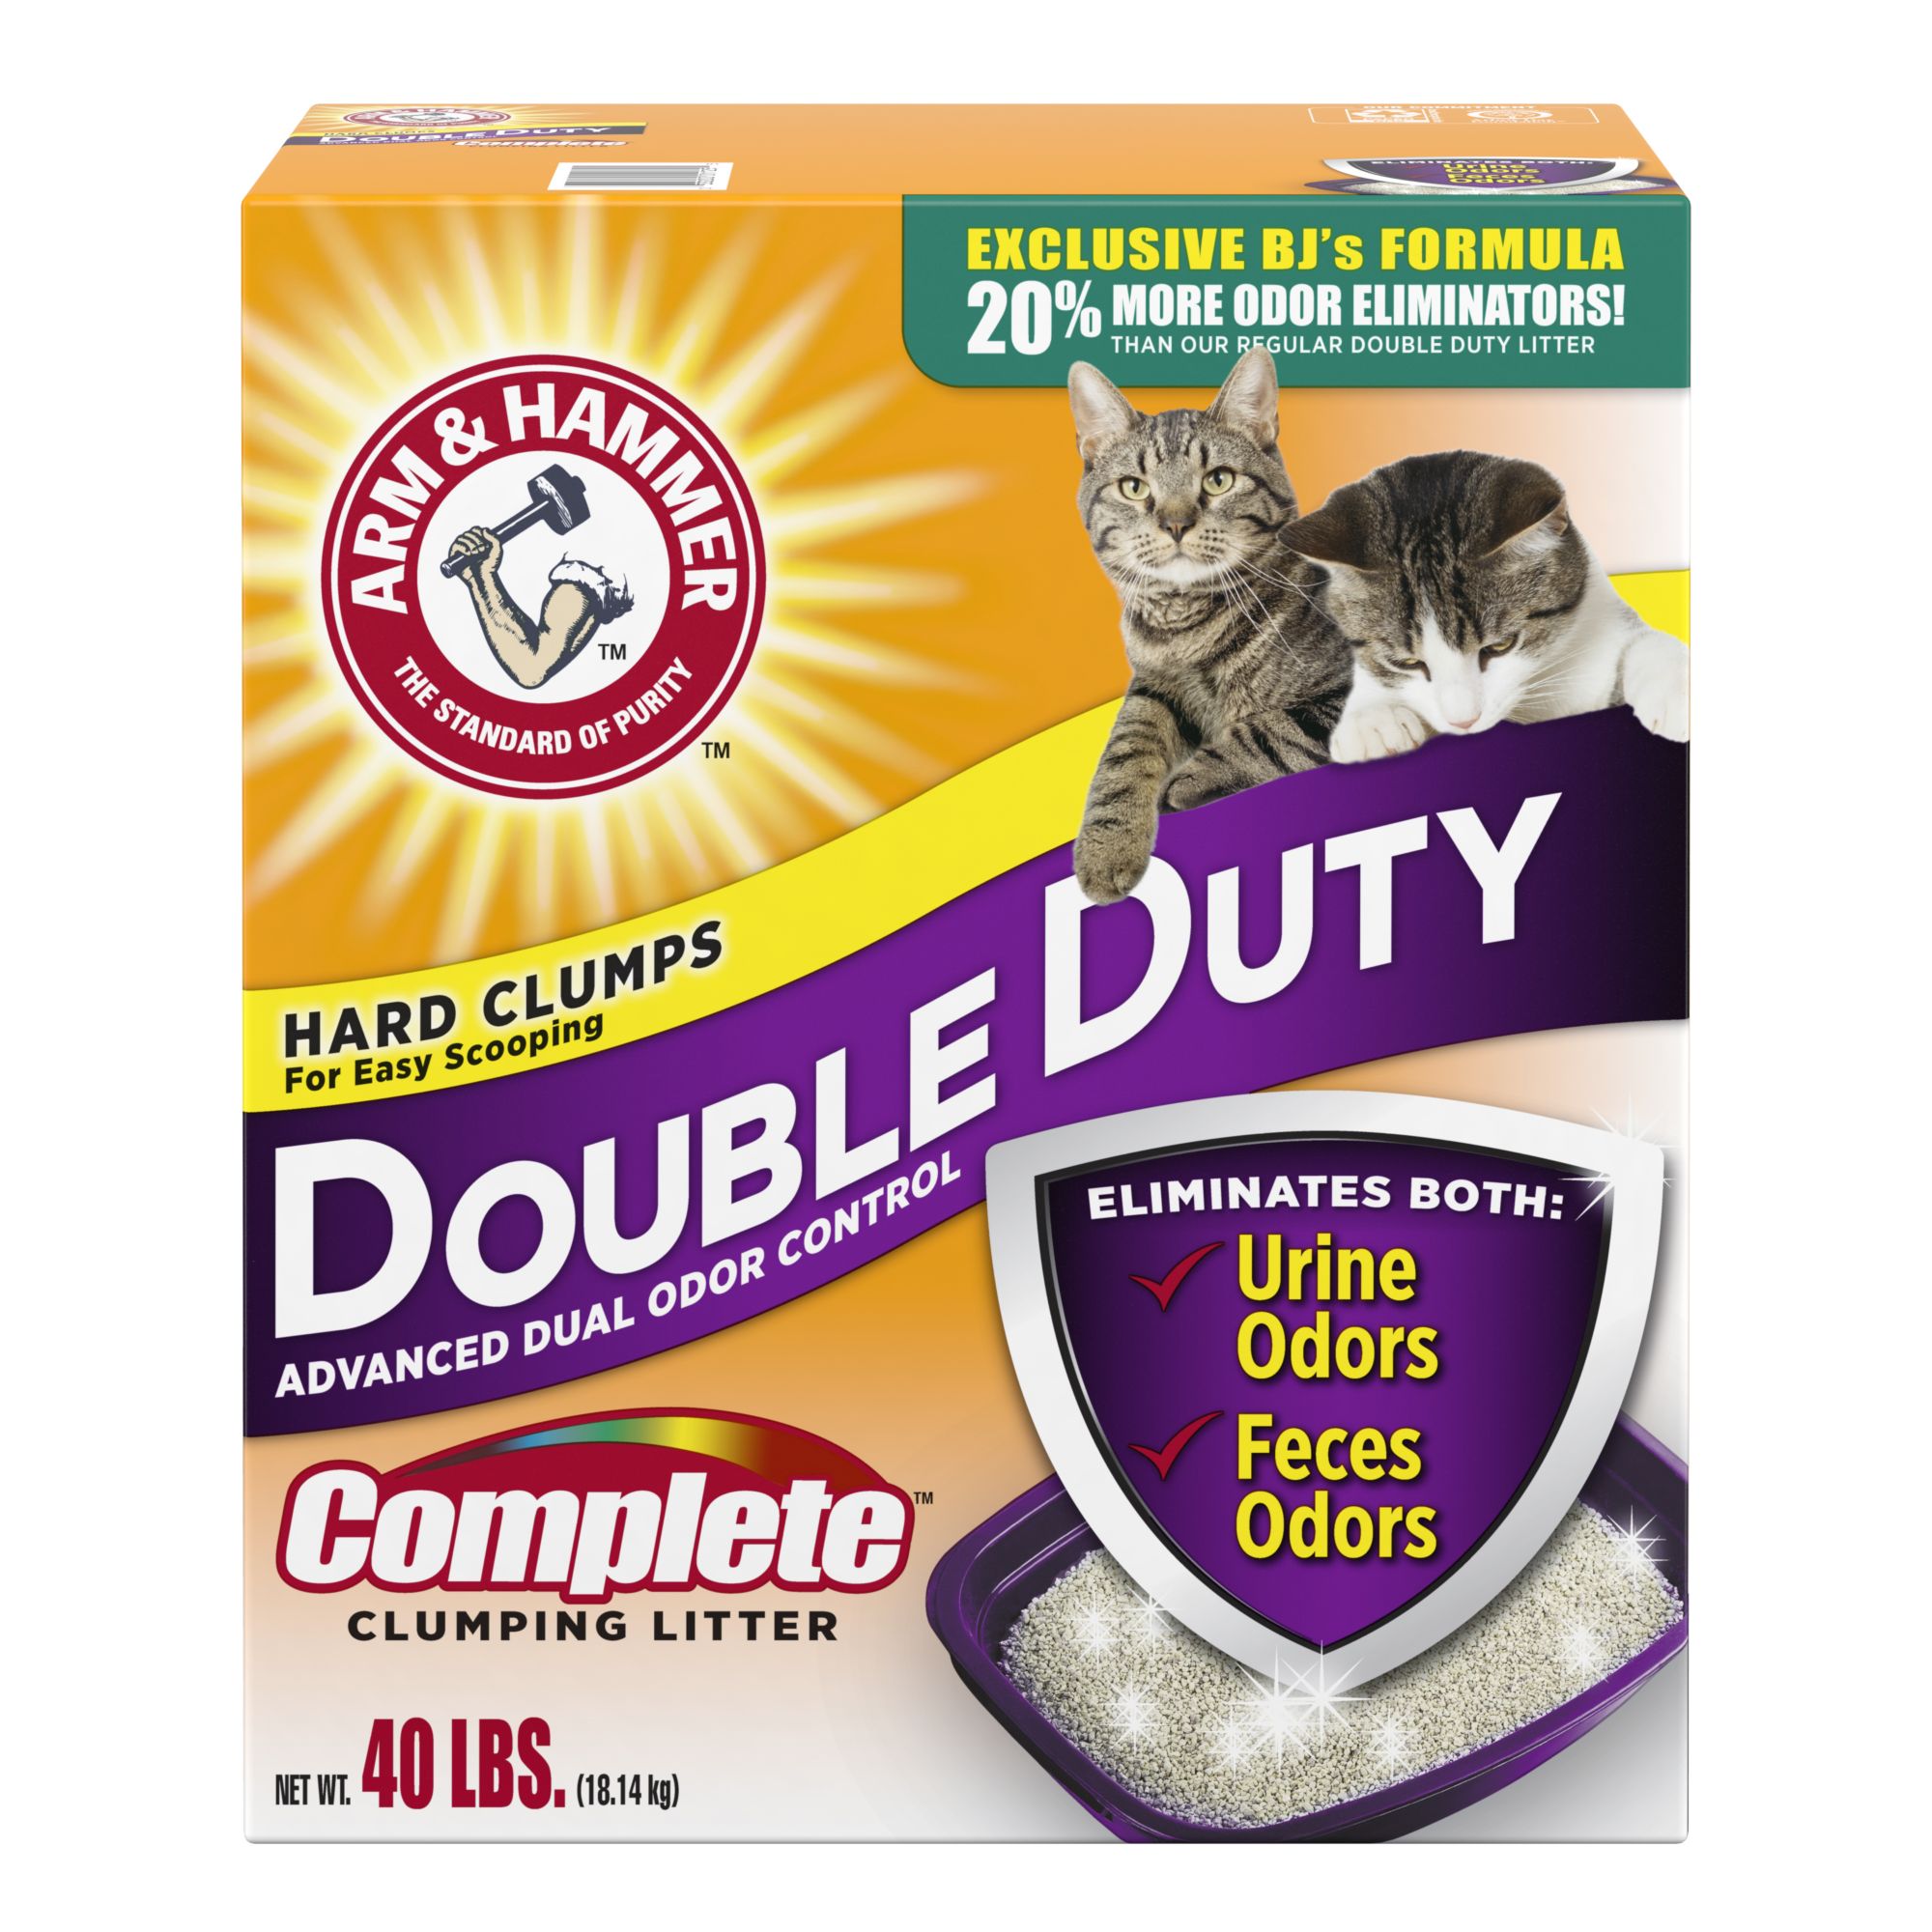 Arm & Hammer Double Duty Complete Clumping Litter, 40 lbs.